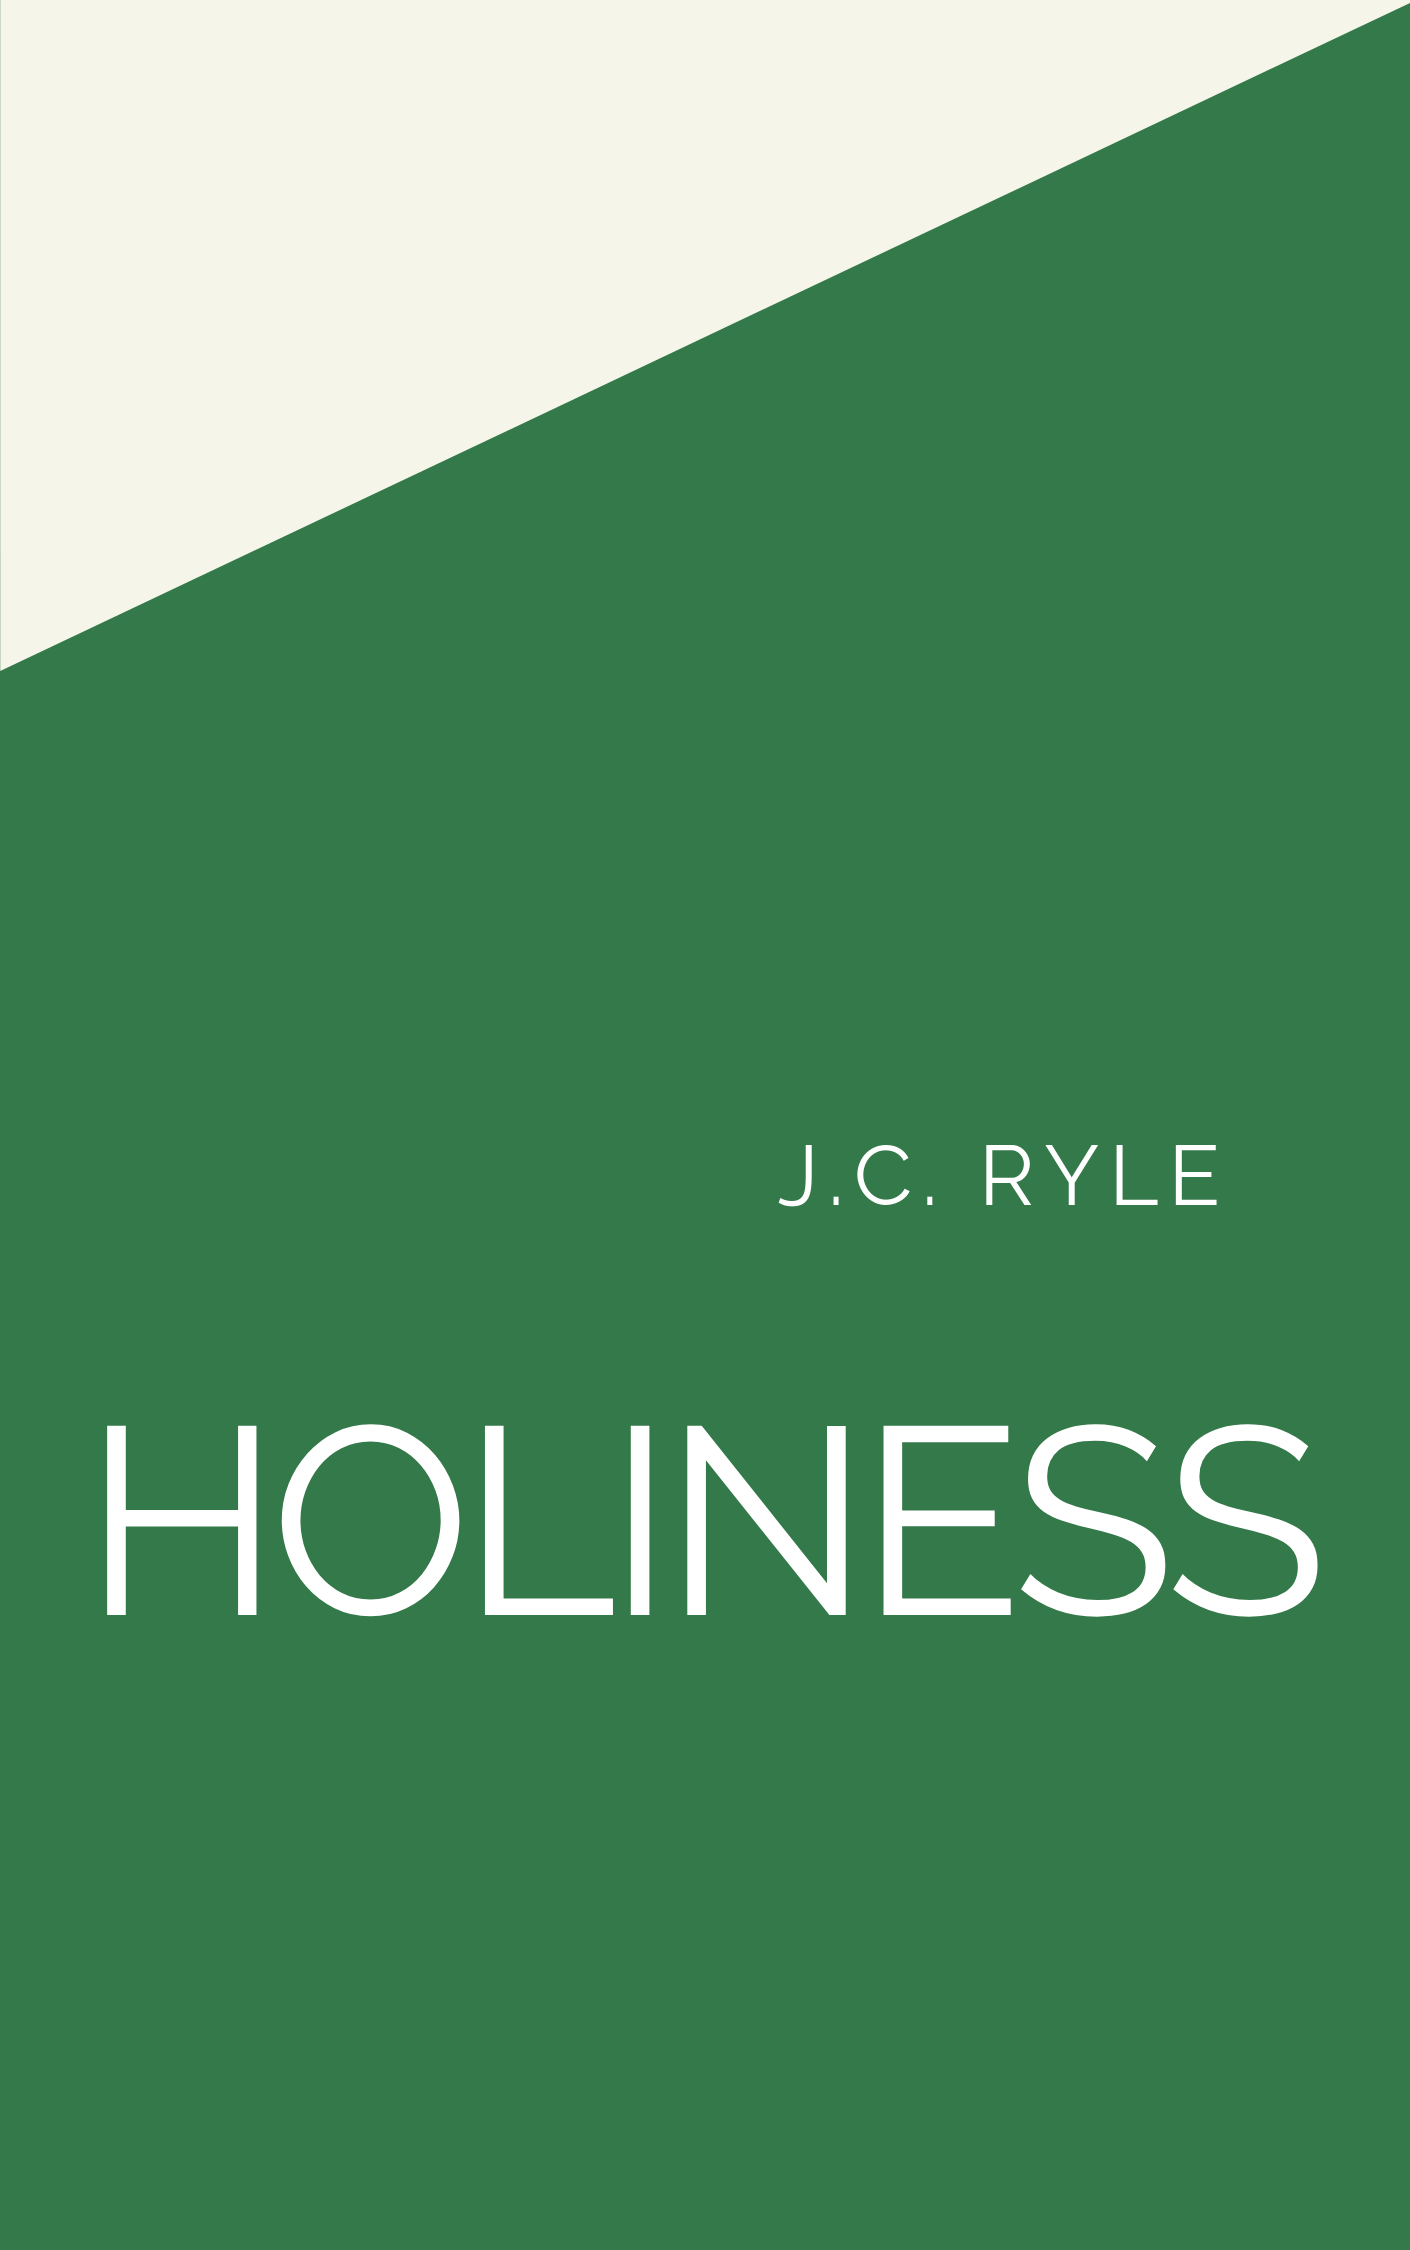 Book Summary of Holiness by J.C. Ryle